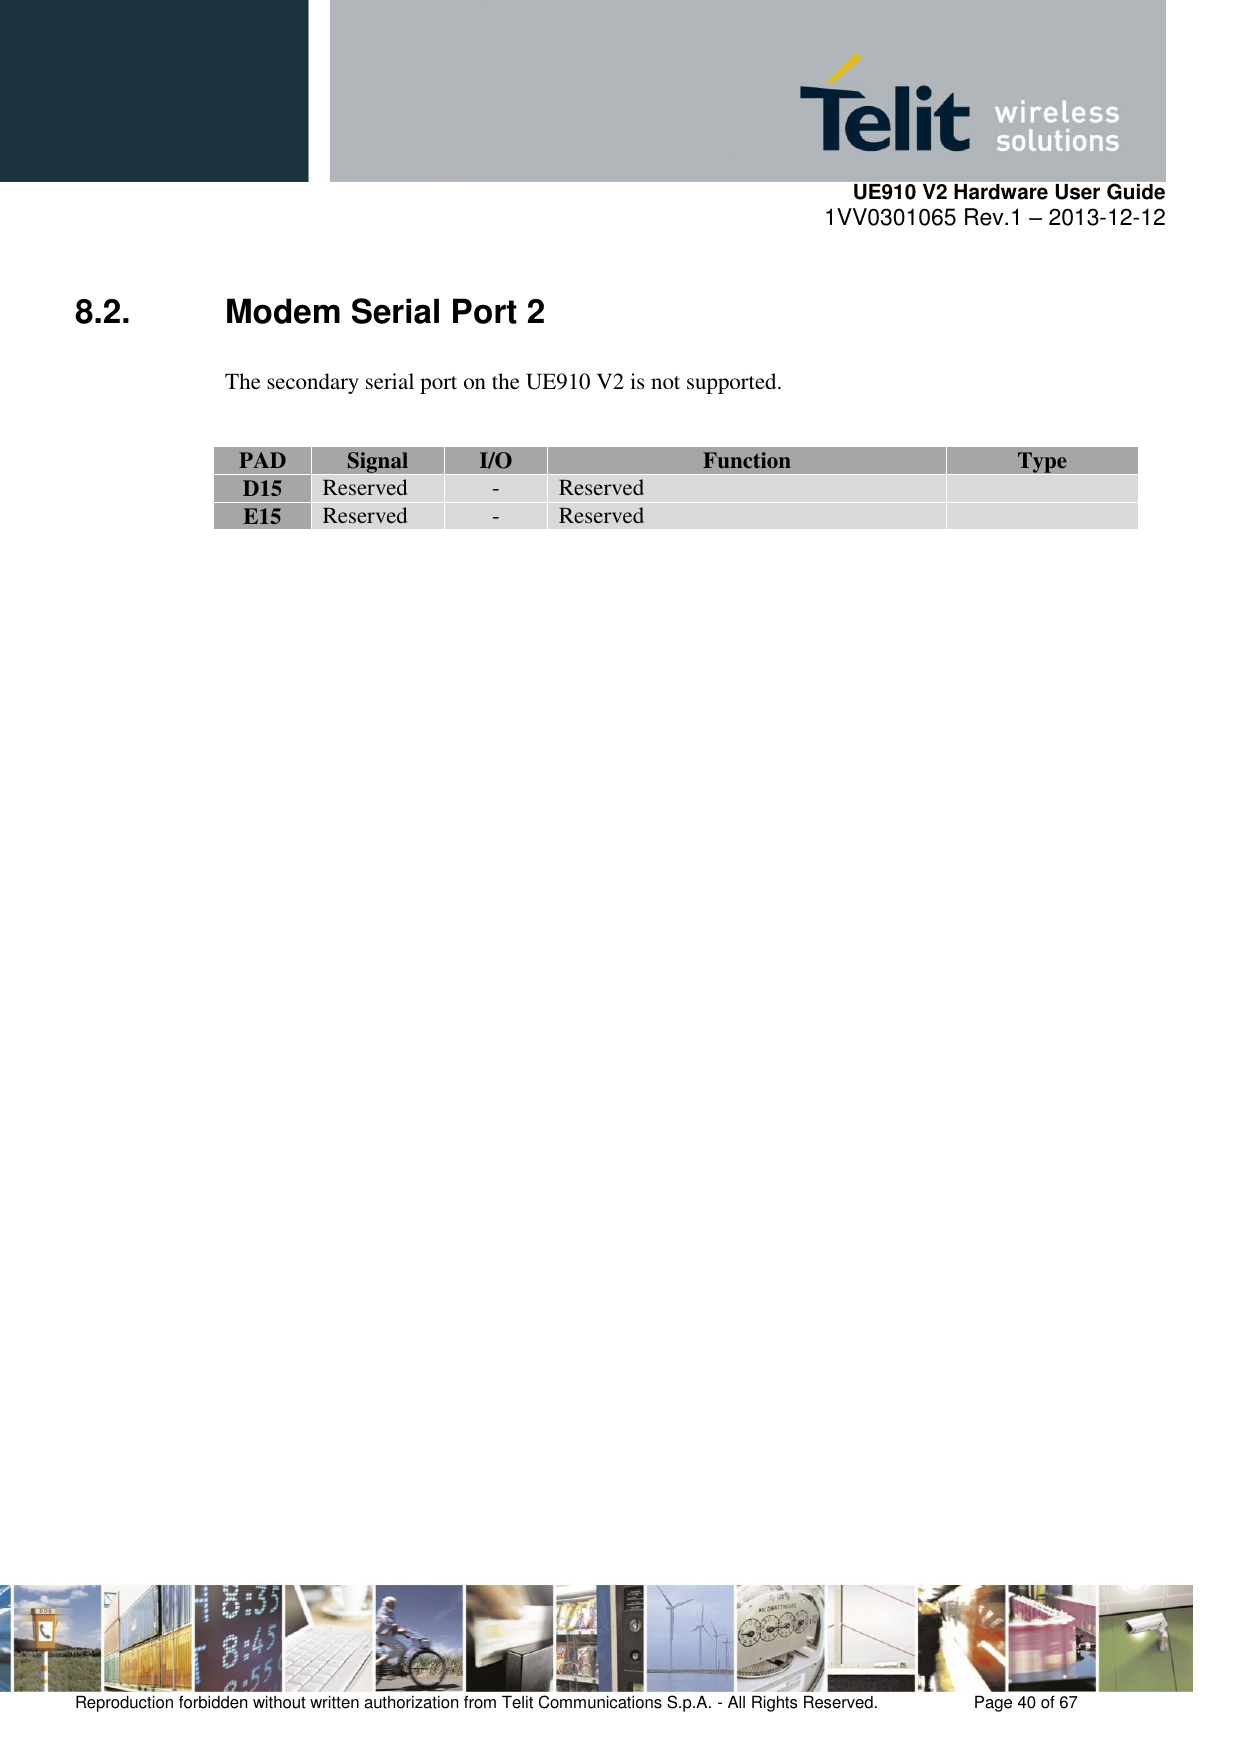     UE910 V2 Hardware User Guide 1VV0301065 Rev.1 – 2013-12-12  Reproduction forbidden without written authorization from Telit Communications S.p.A. - All Rights Reserved.    Page 40 of 67                                                     8.2.  Modem Serial Port 2 The secondary serial port on the UE910 V2 is not supported.  PAD Signal I/O Function Type D15 Reserved - Reserved  E15 Reserved - Reserved                         